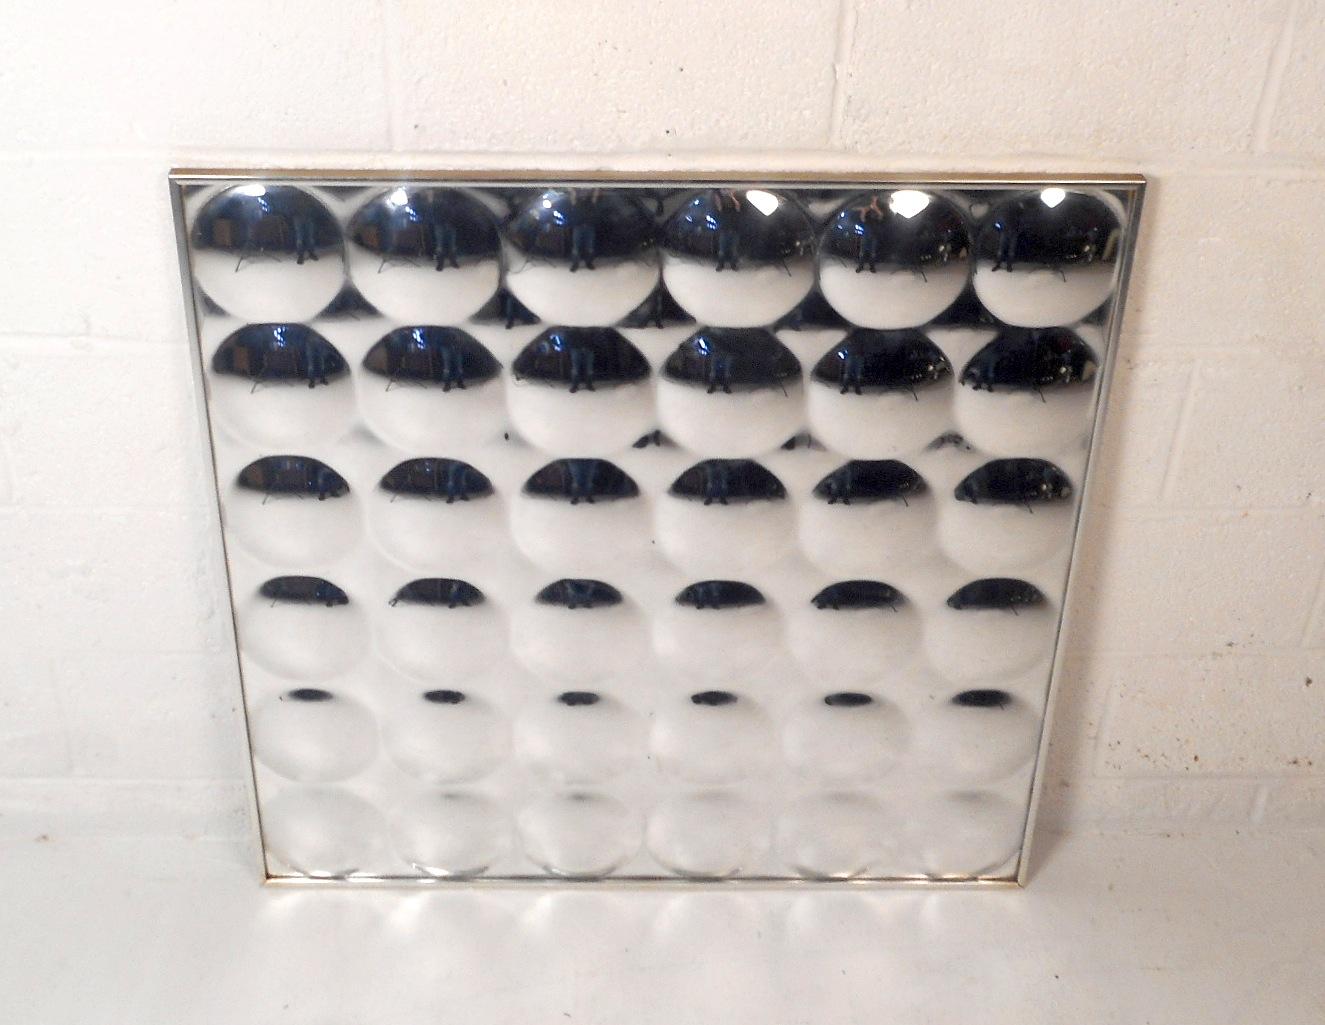 This unique vintage style wall art is composed of 36 mirrored bubbles on a chrome frame. The eye-catching plexi-view mirrors reflect everything in the room and are sure to be a conversation starter in any setting. Please confirm item location (NJ or